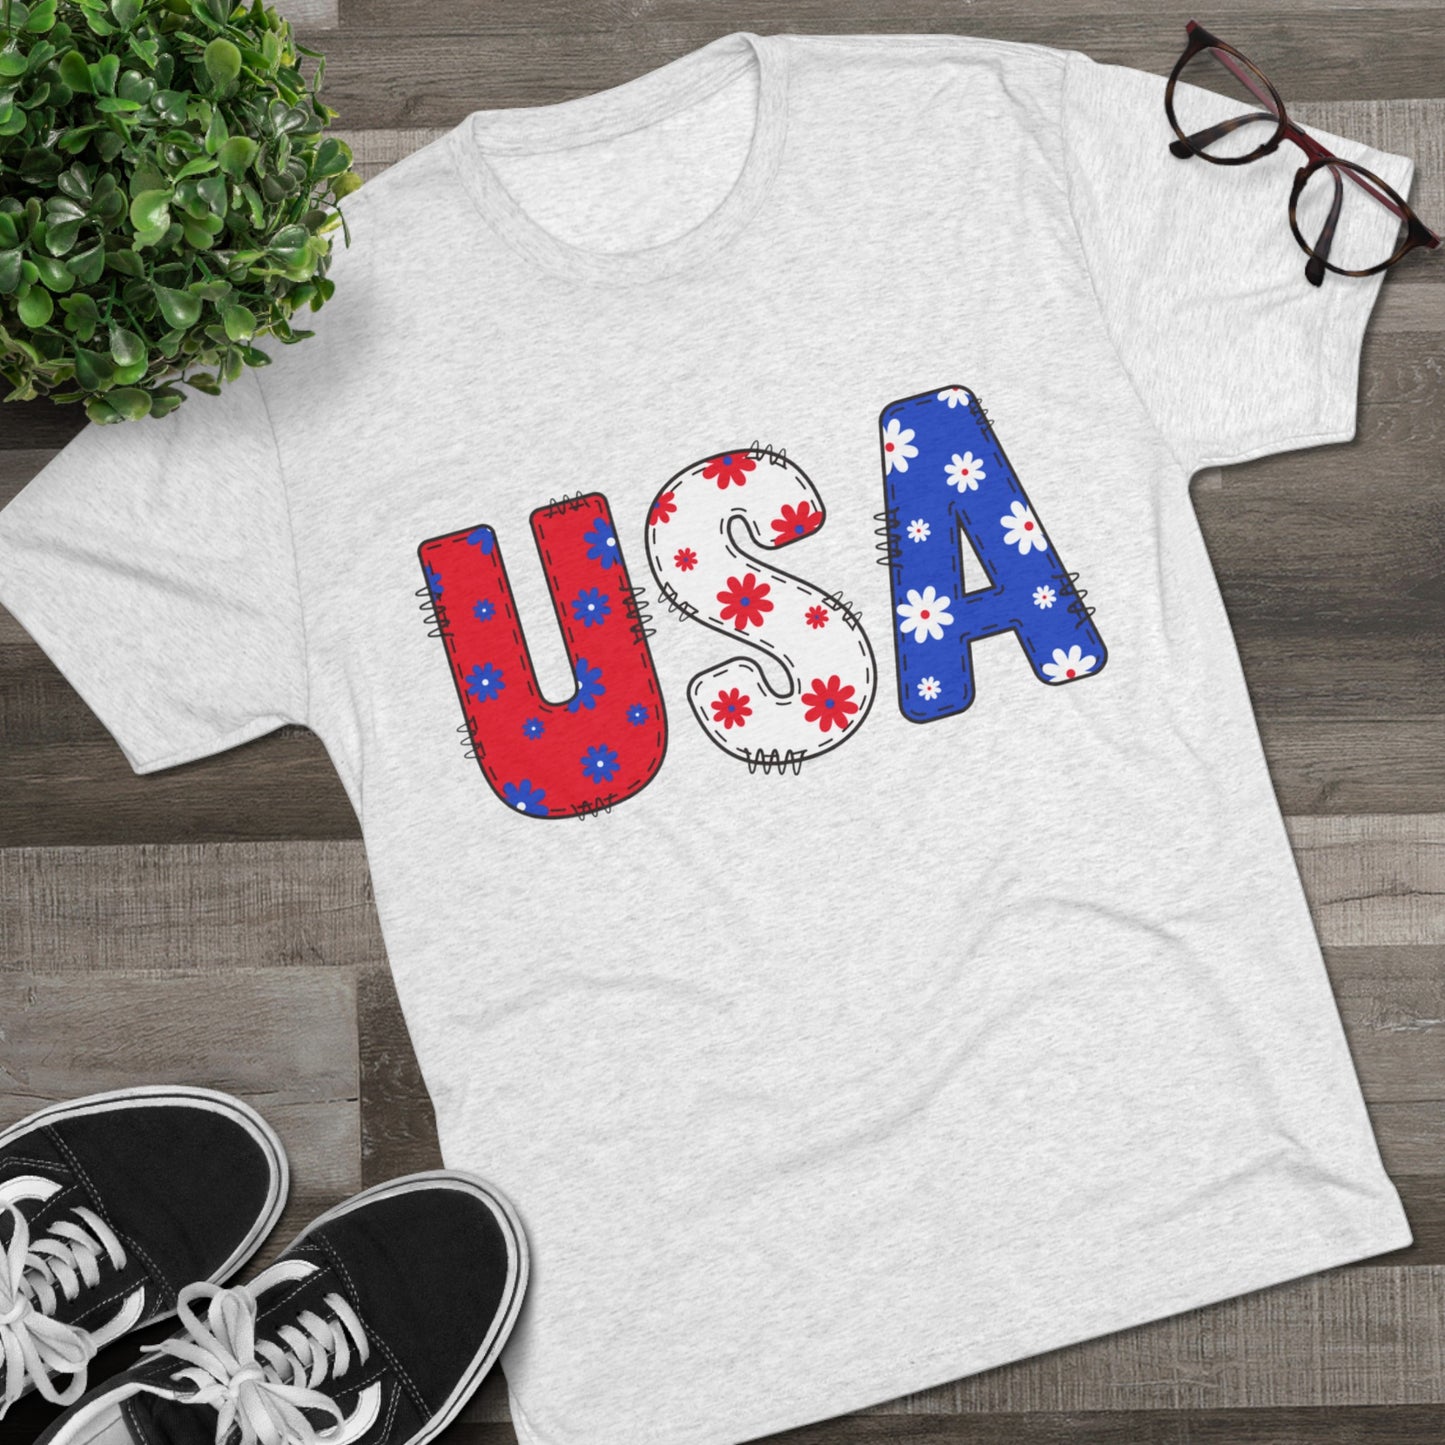 Get trendy with USA Unisex Tri-Blend Crew Tee - T-Shirt available at Good Gift Company. Grab yours for $21.88 today!